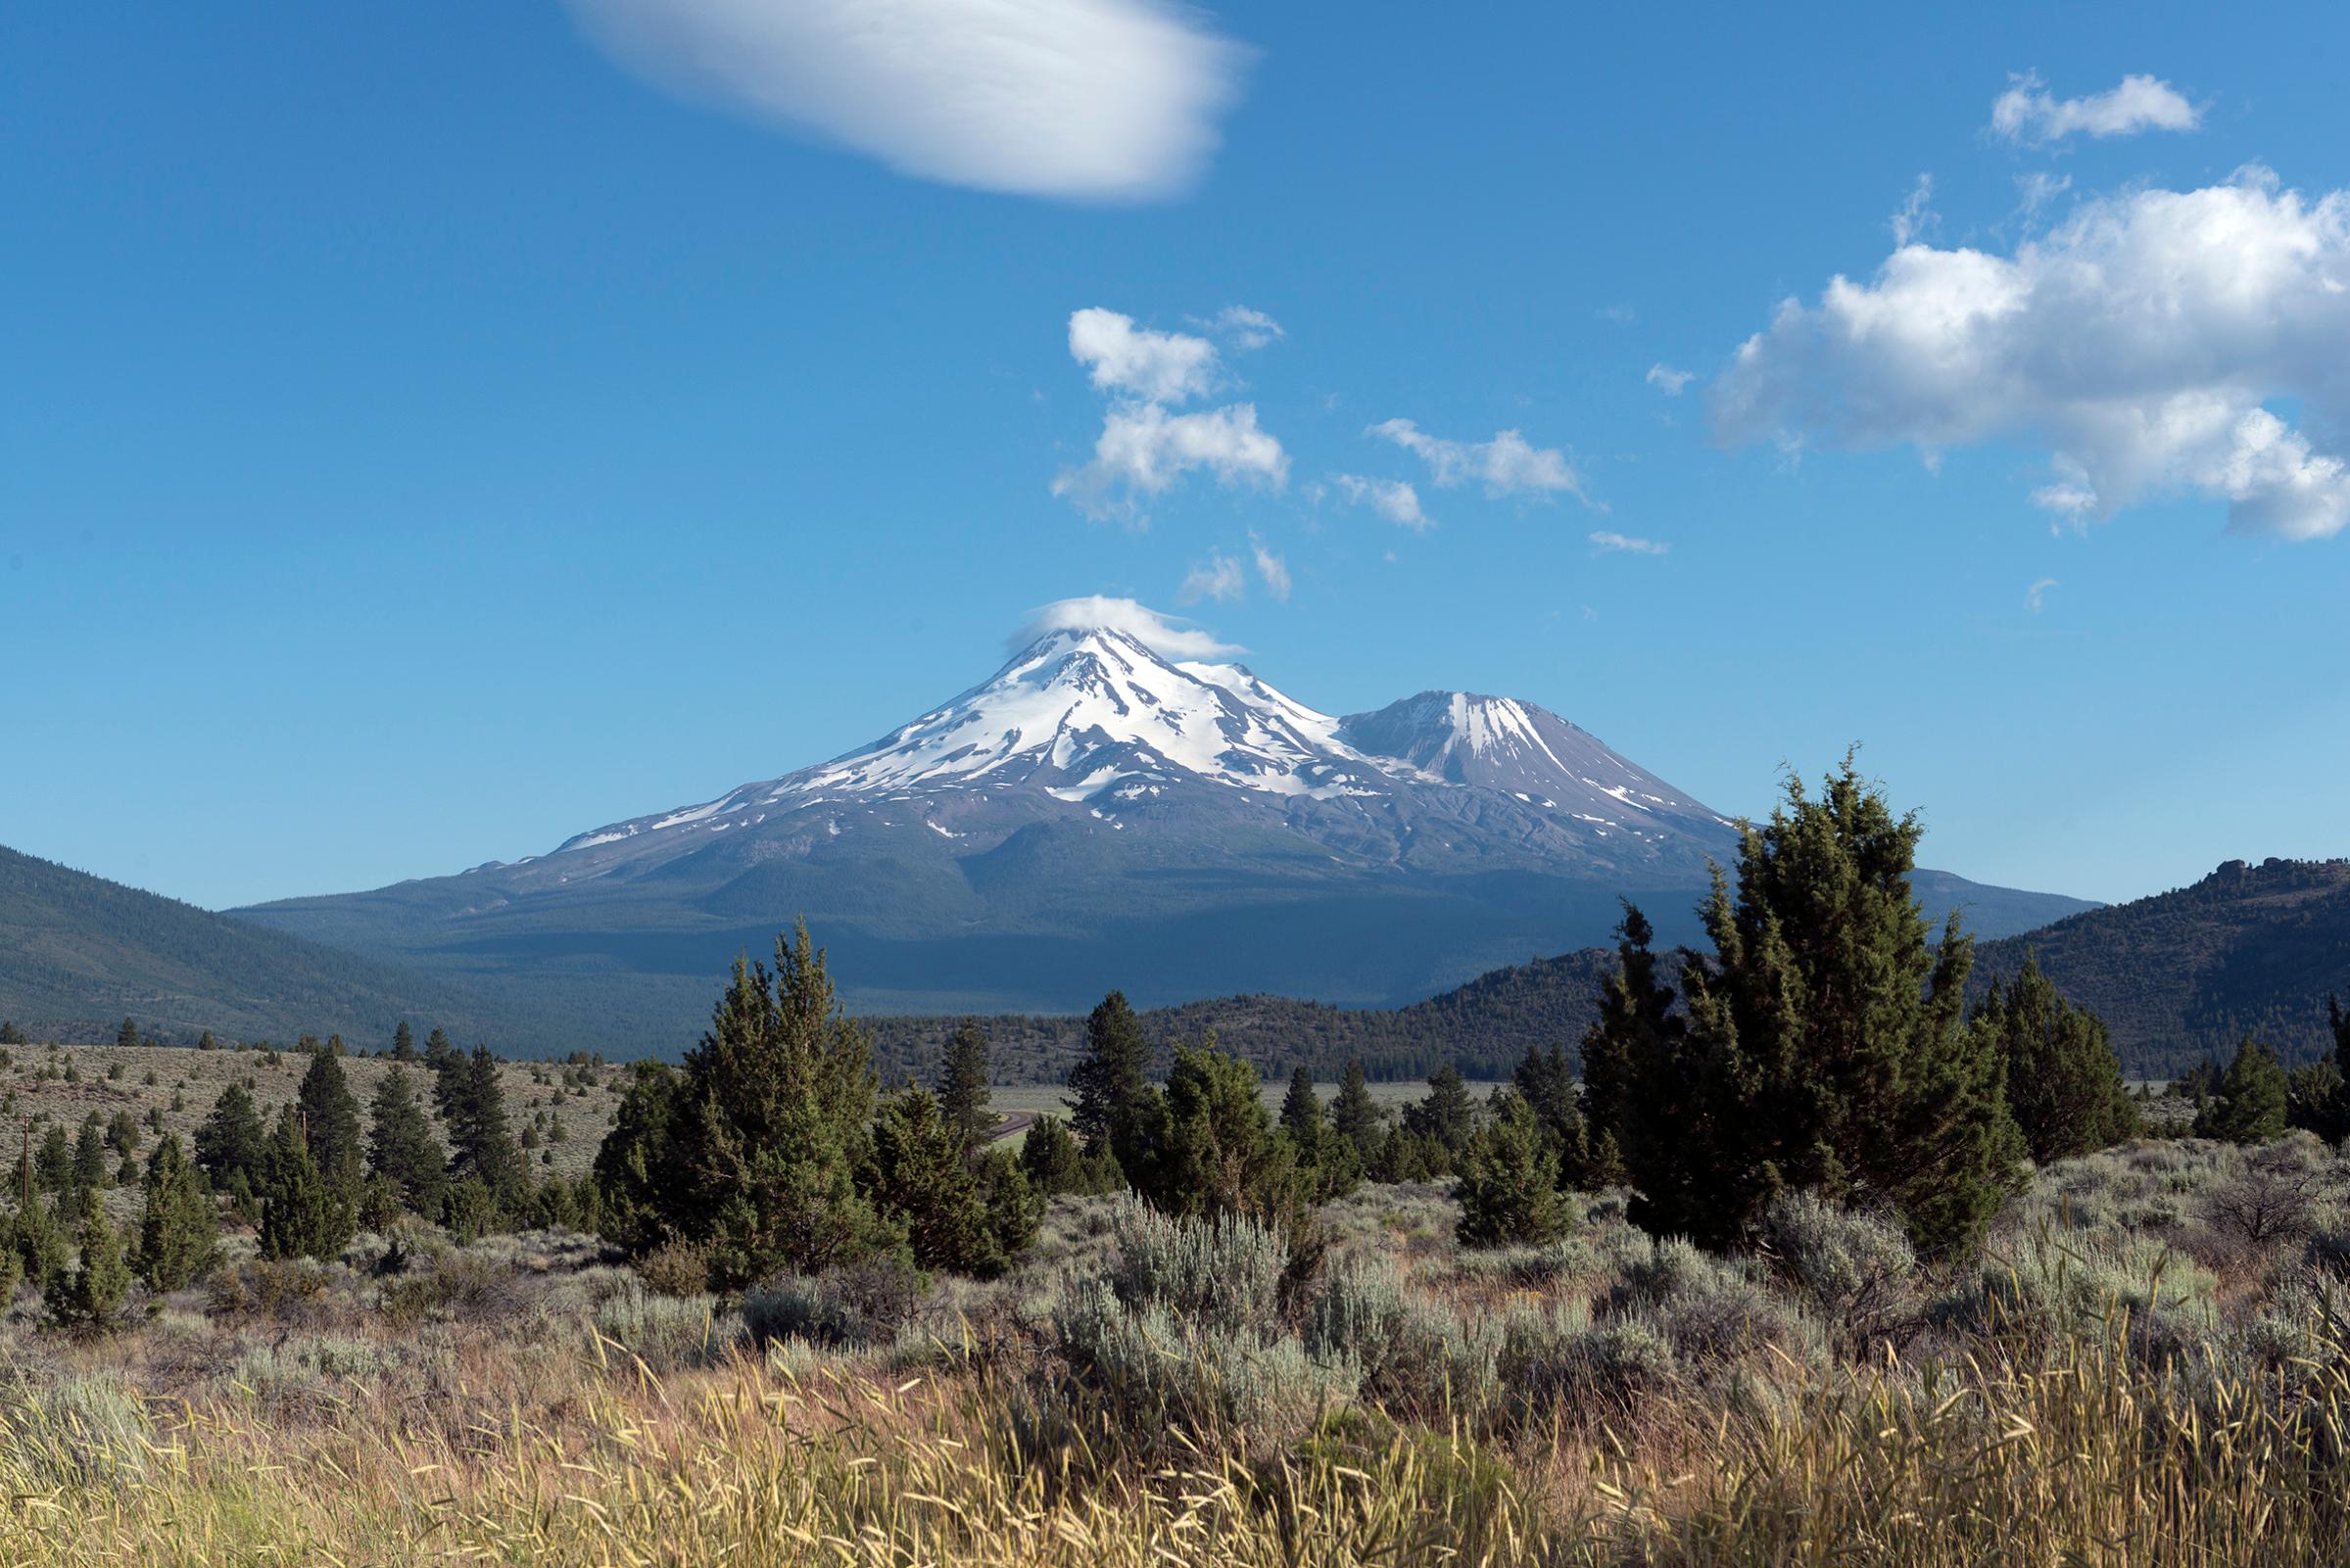 Mount Shasta, is located at the southern end of the Cascade Range in Siskiyou County, California